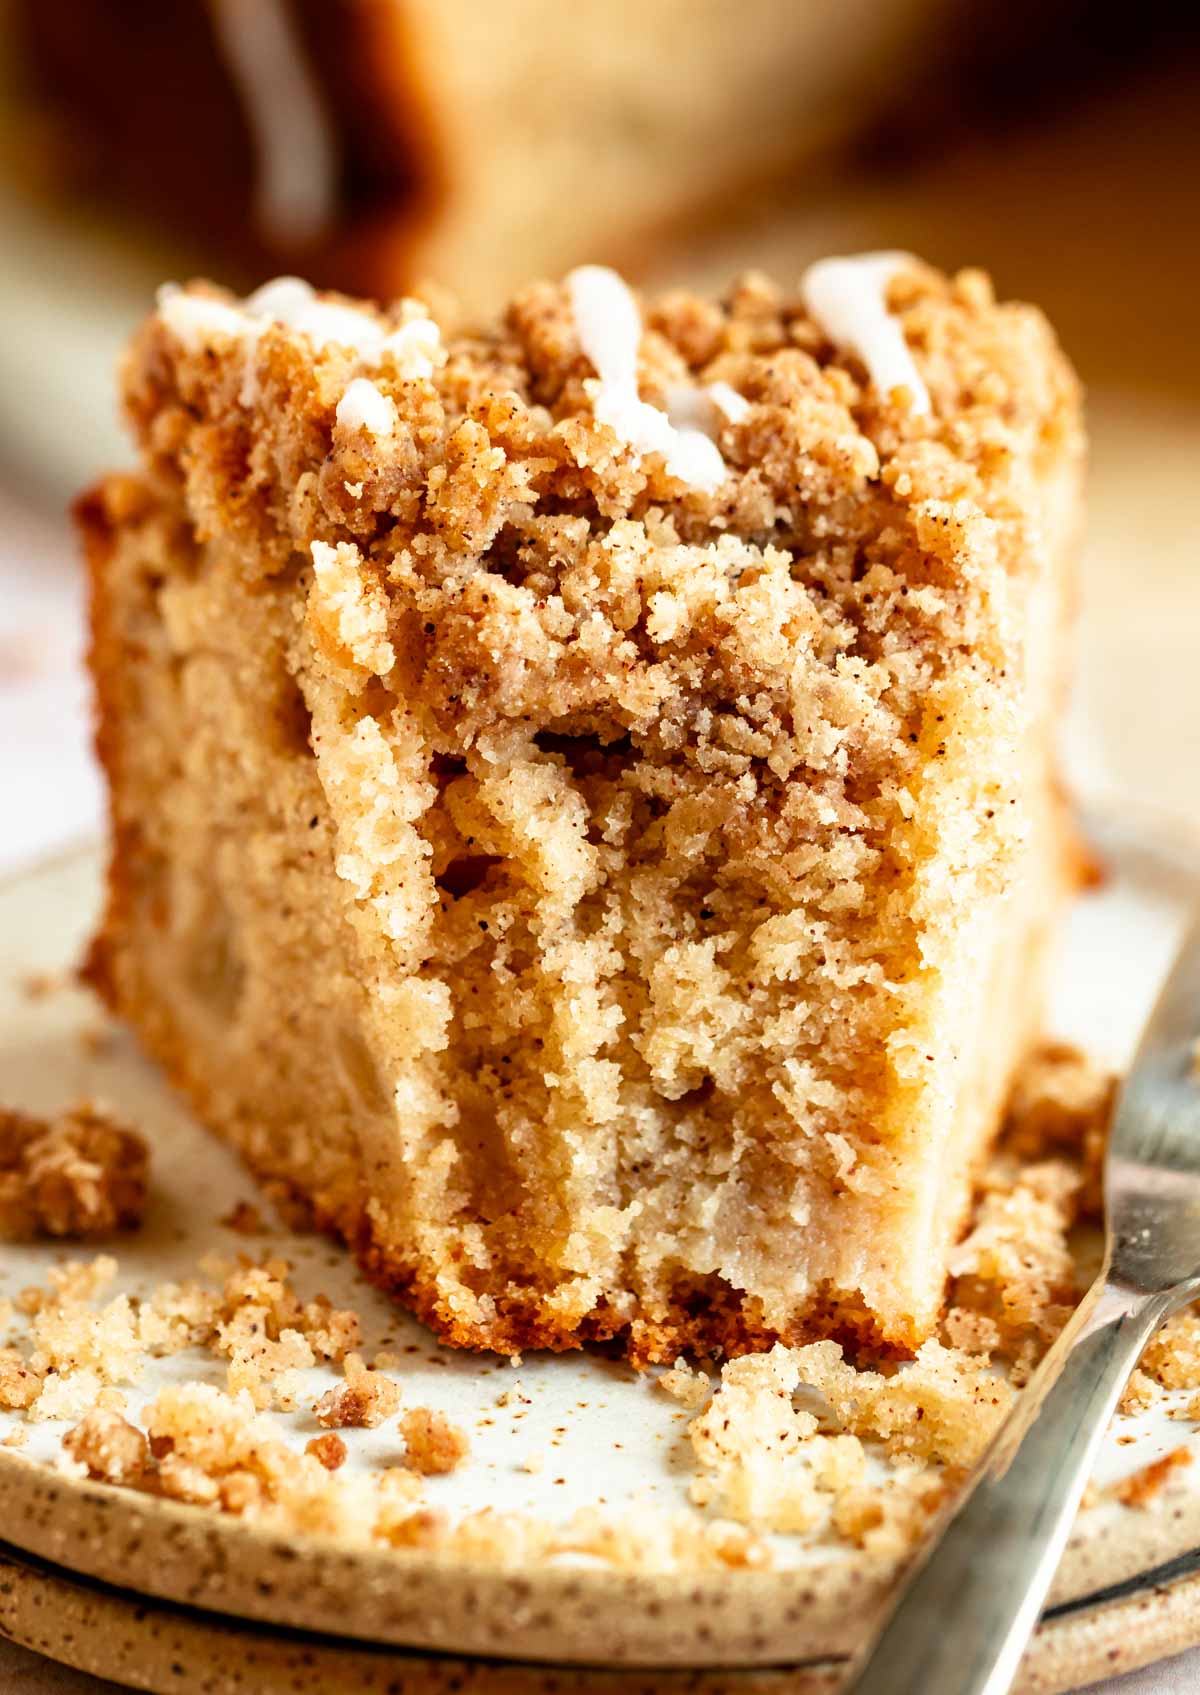 Close up shot of a slice of cake with a bite missing.